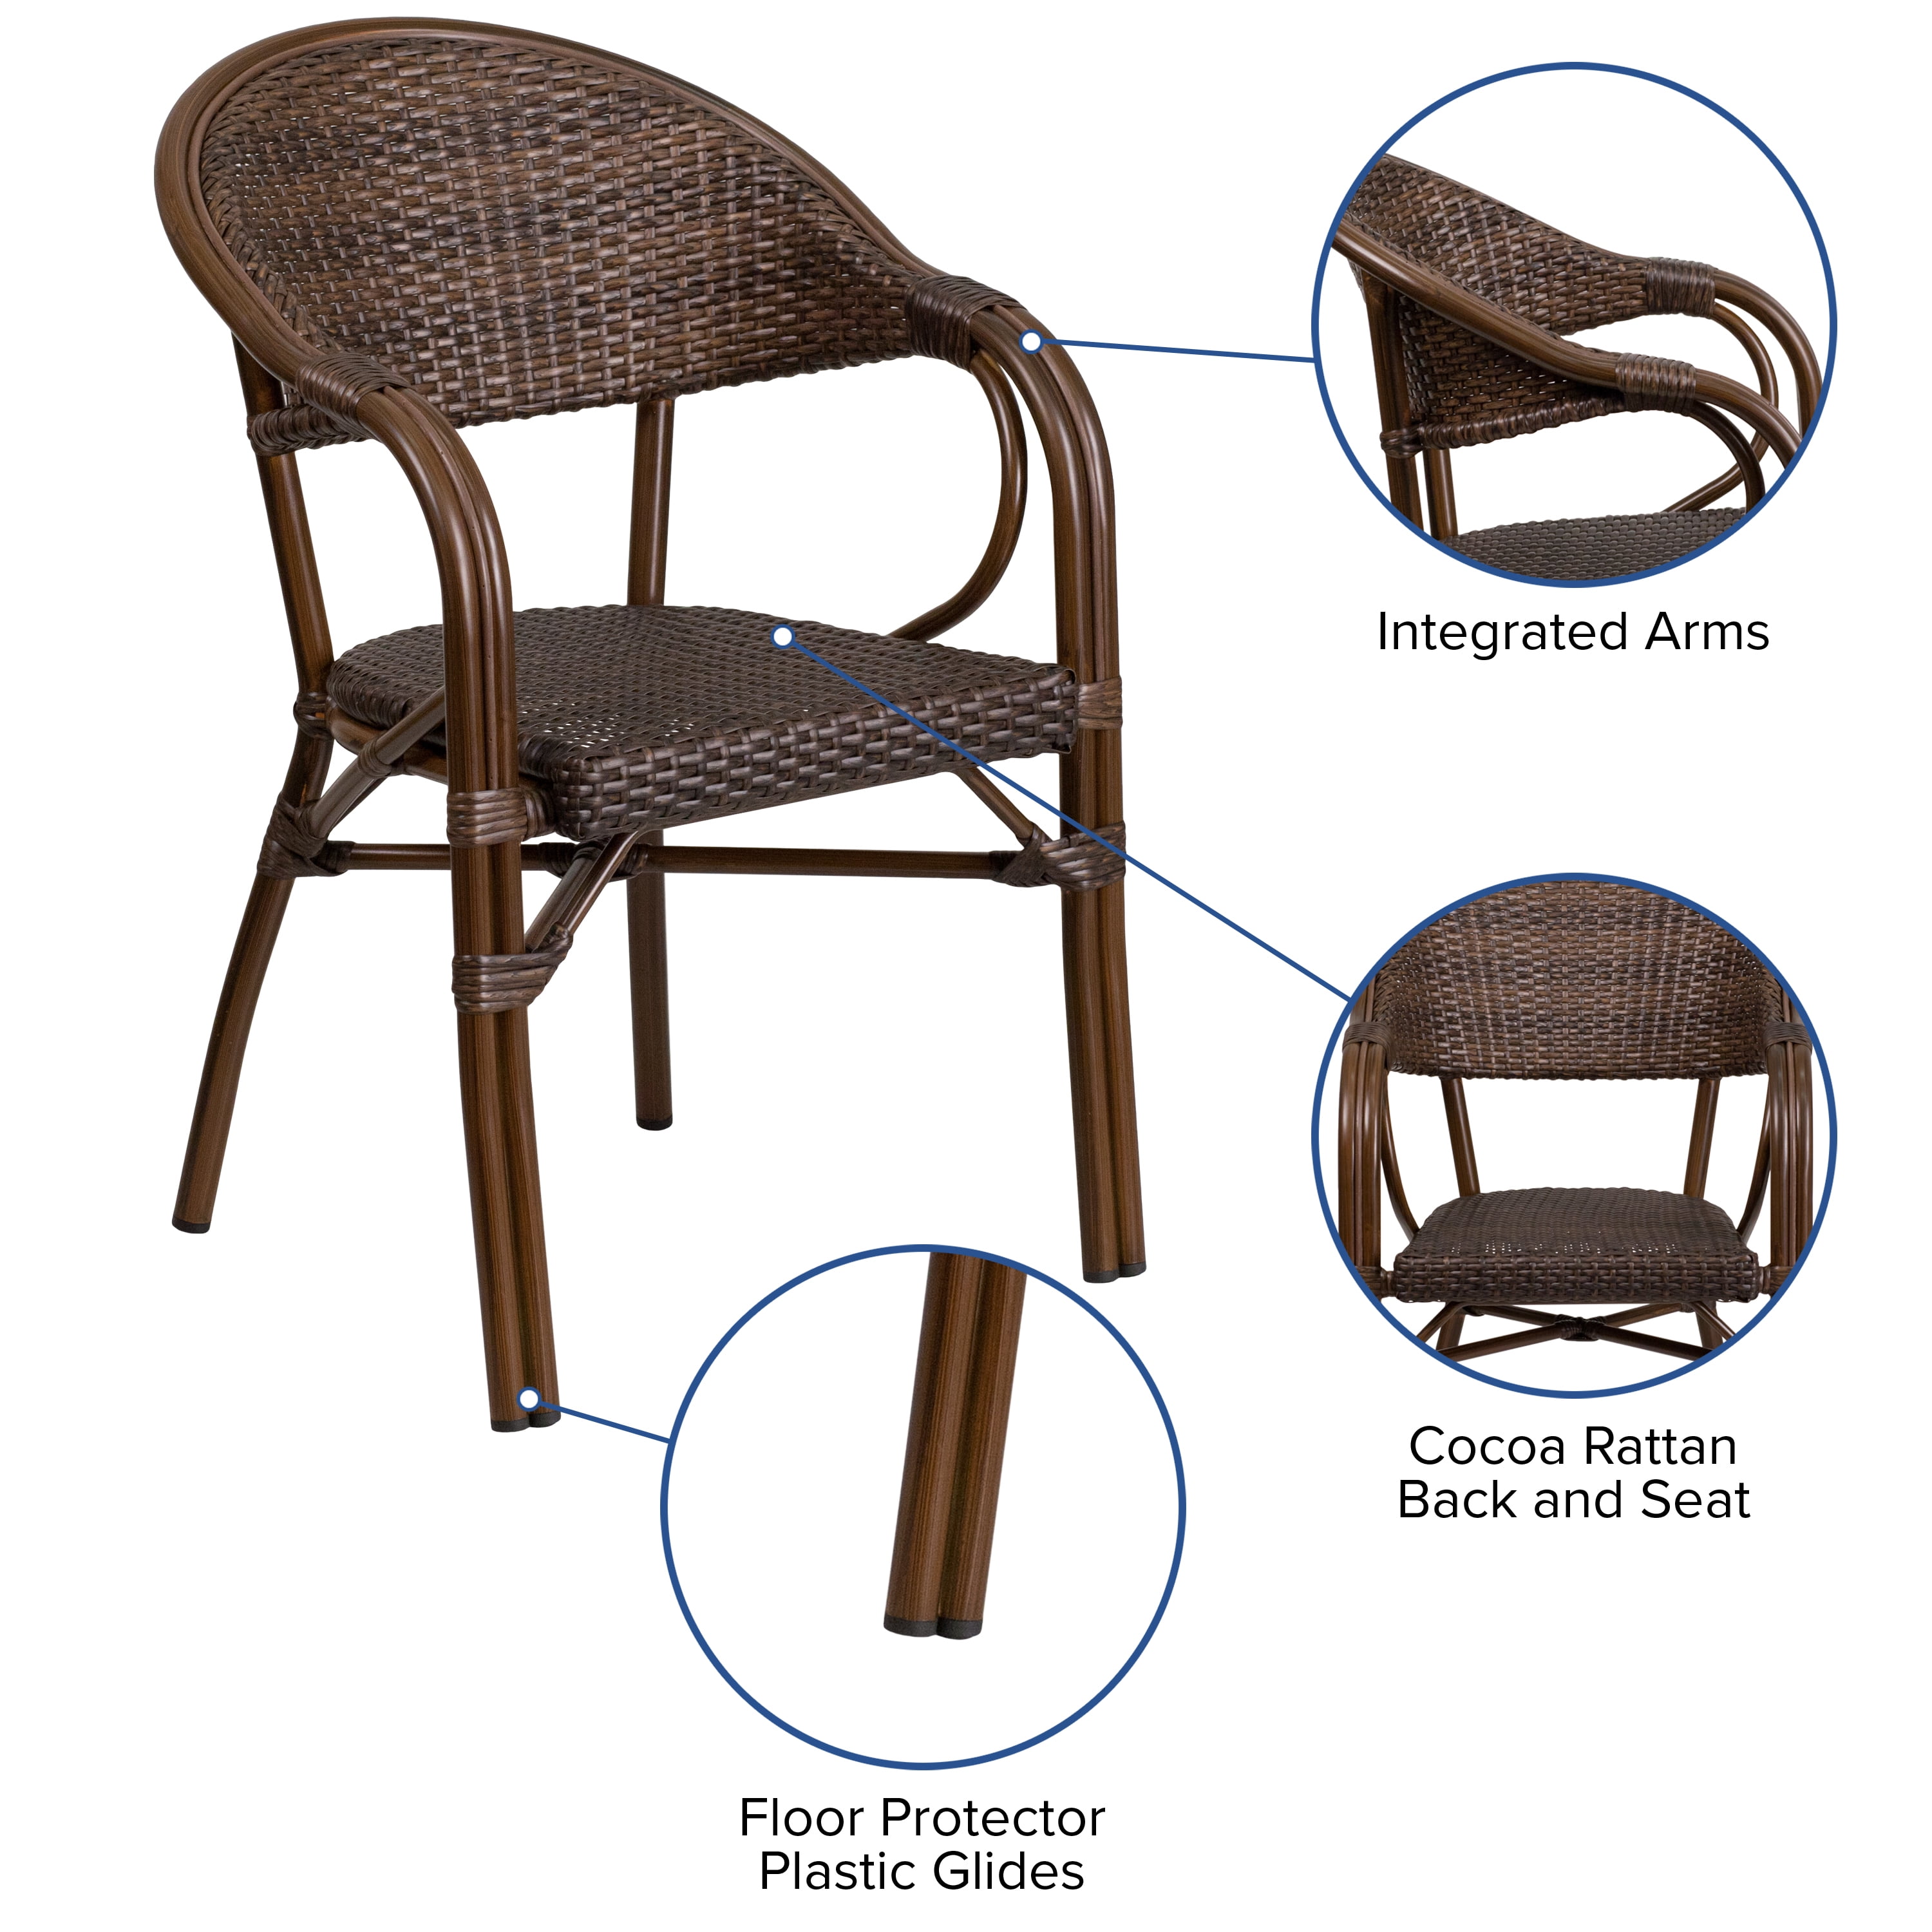 Flash Furniture Milano Series Cocoa Rattan Restaurant Patio Chair with Bamboo-Aluminum Frame - image 4 of 11